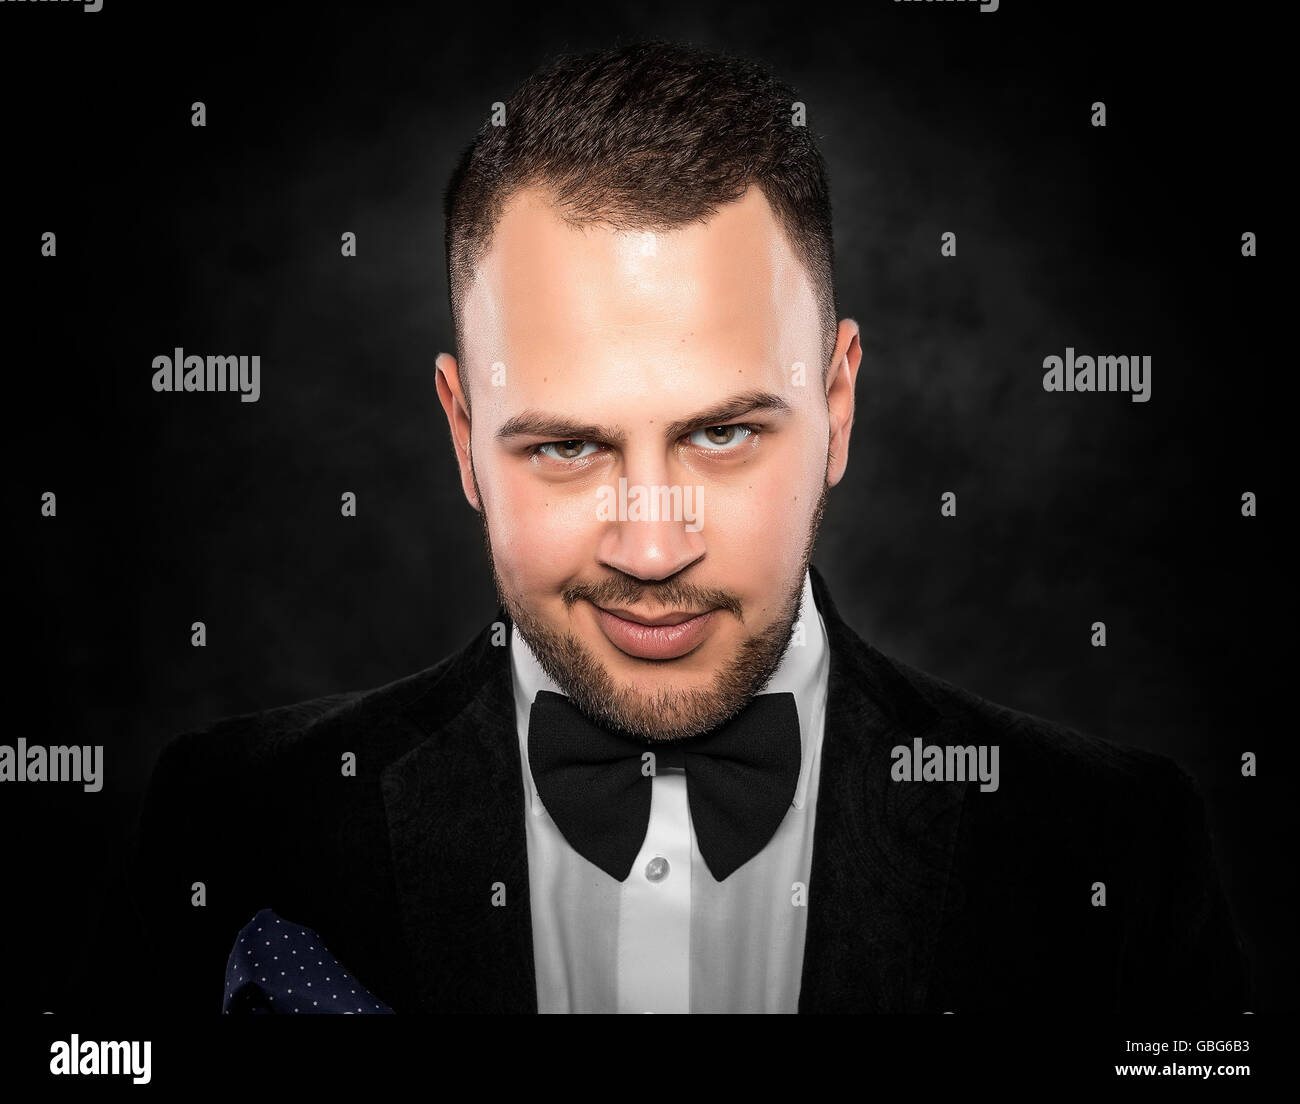 Young handsome man in black suit on dark background. Stock Photo